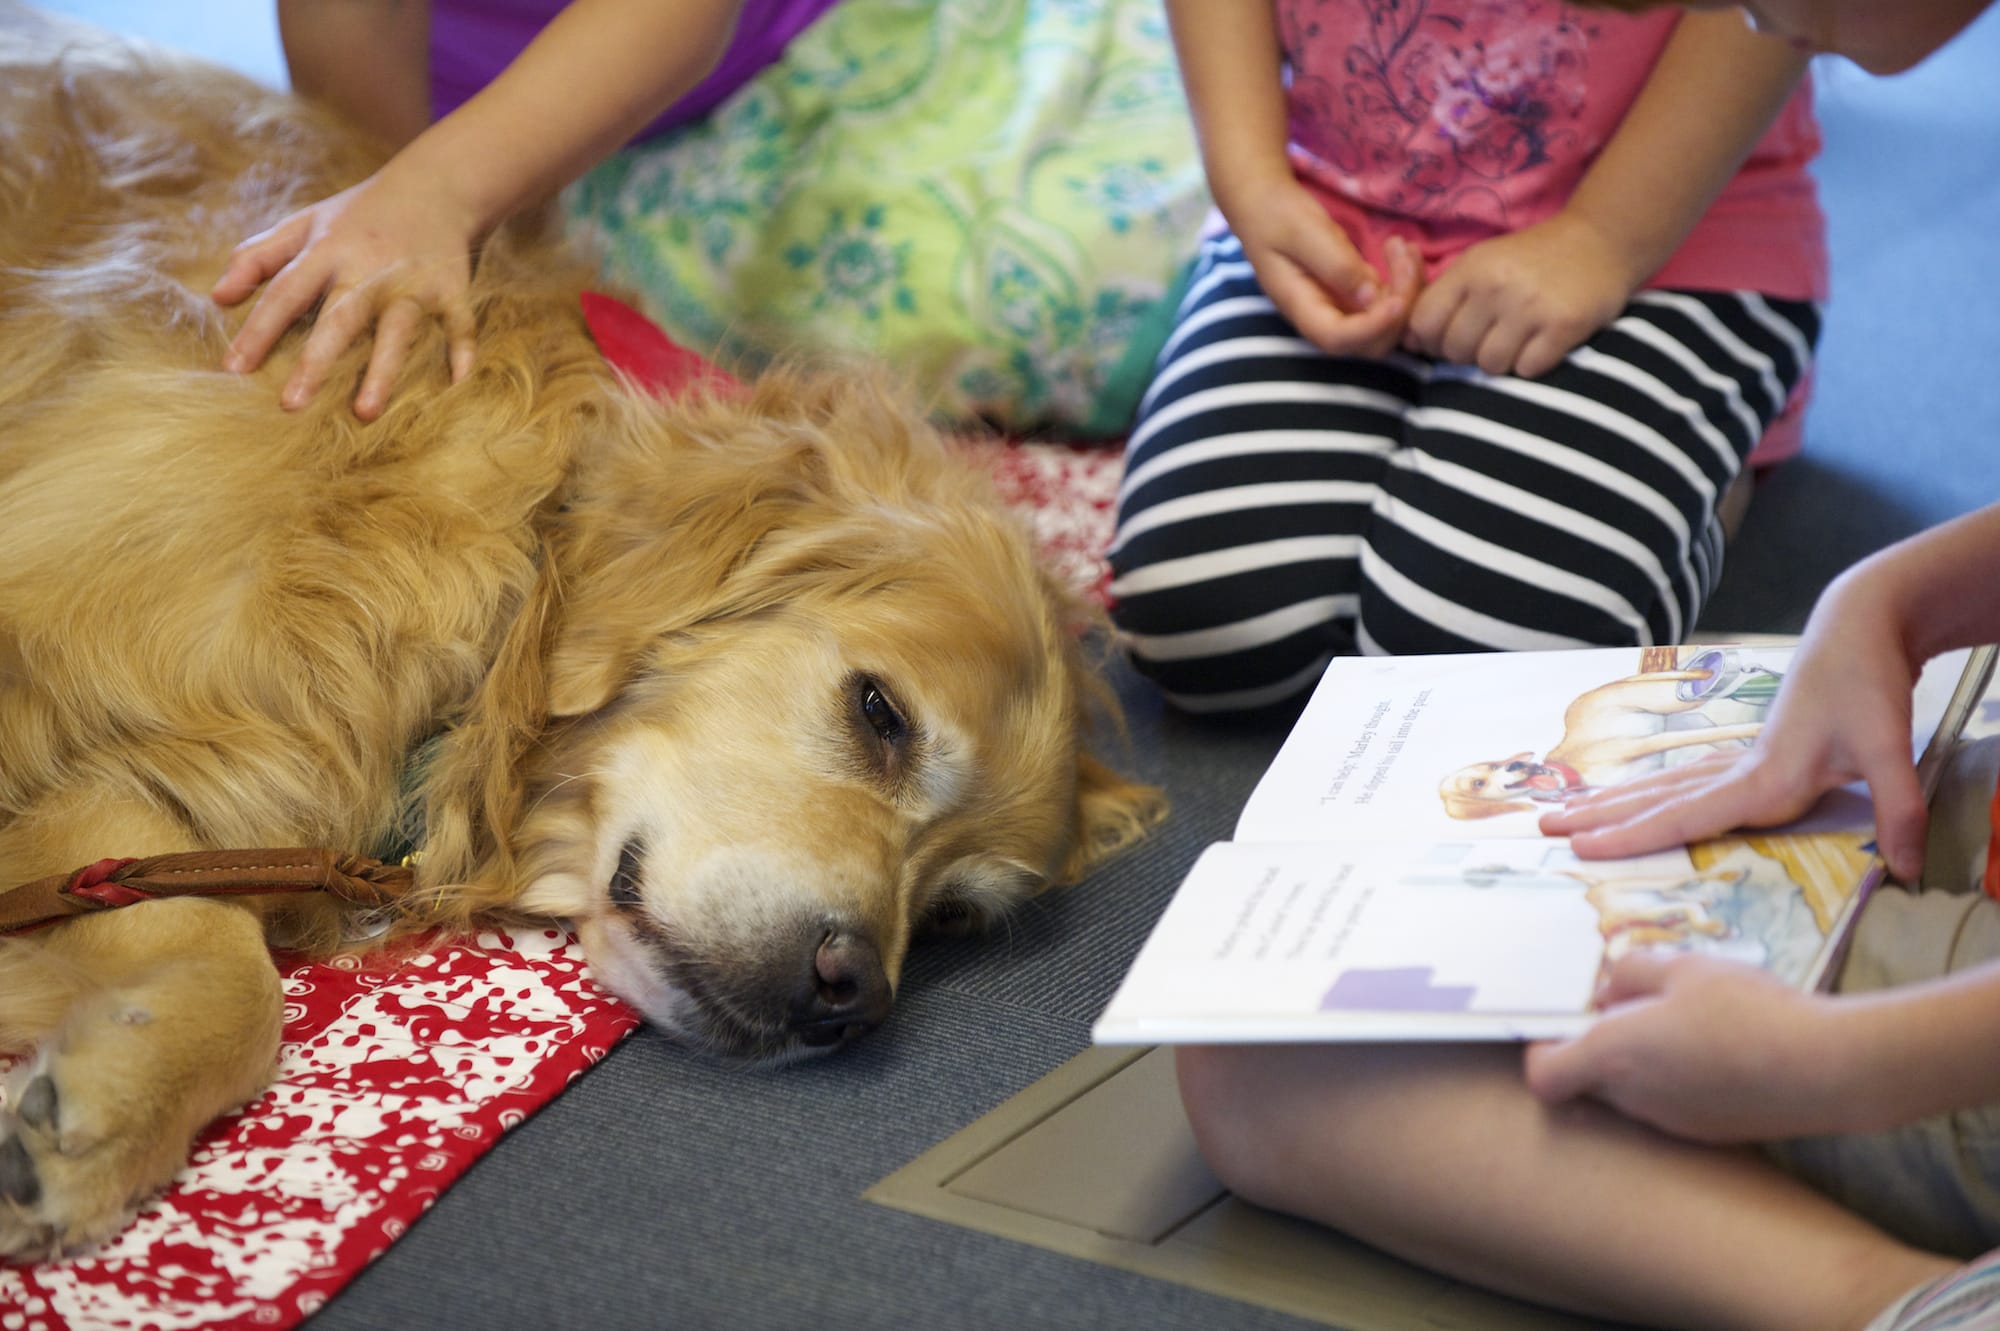 Children practice their reading skills with therapy dog Crunch, a 7  1/2  year-old golden retriever, at the Vancouver Community Library Wednesday.